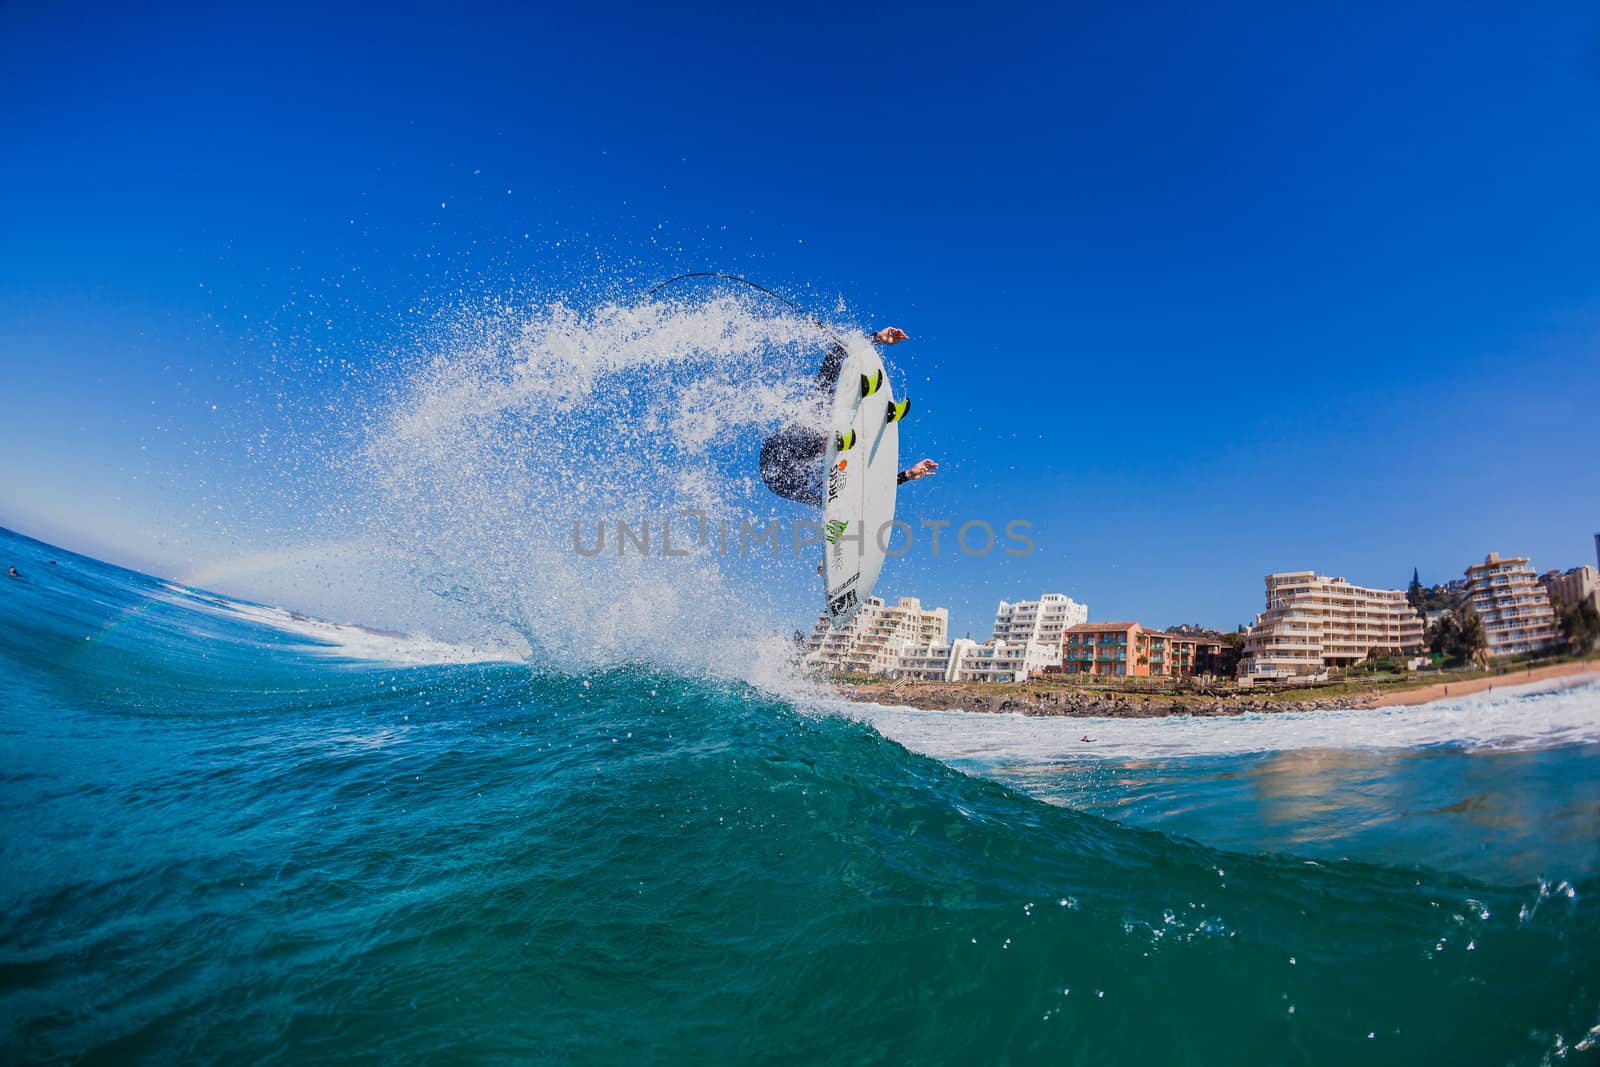 Water perspective of surfer doing air maneuver off ocean wave lip.